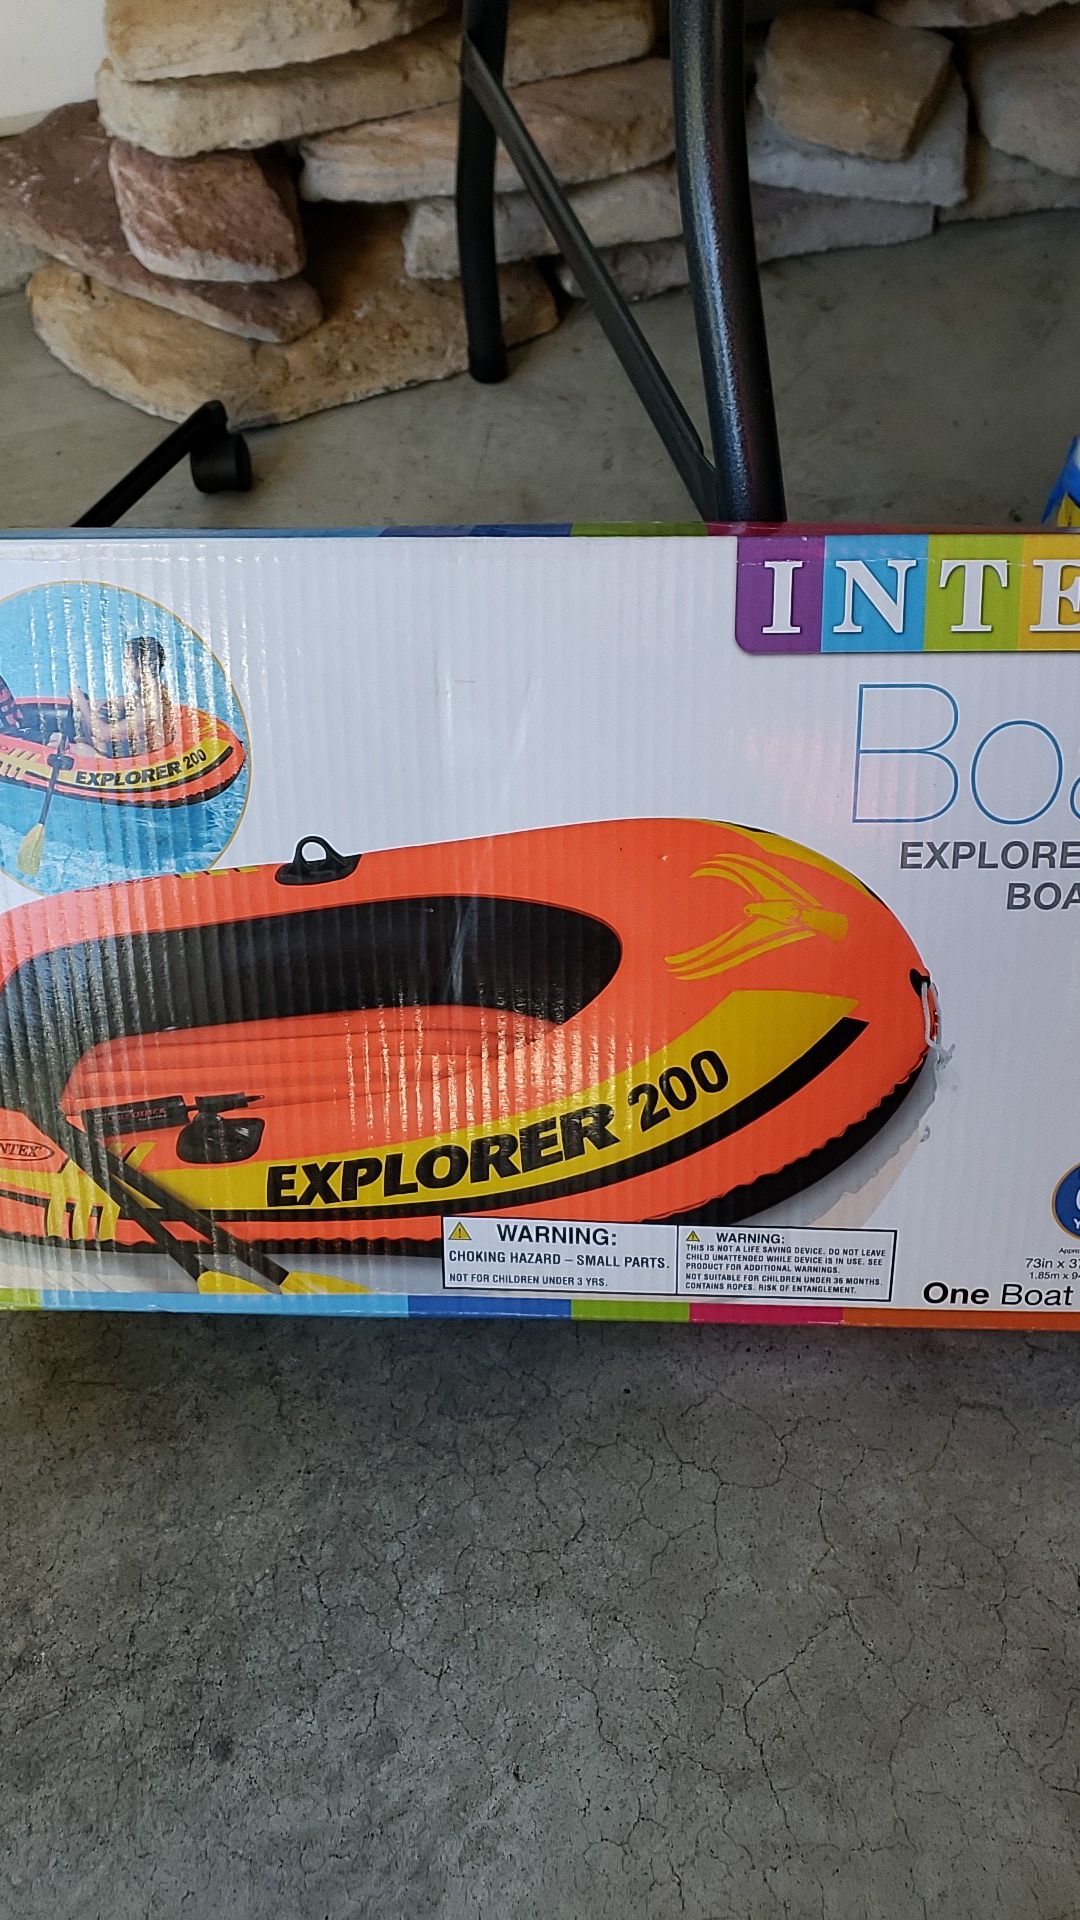 Inflatable Boat Set